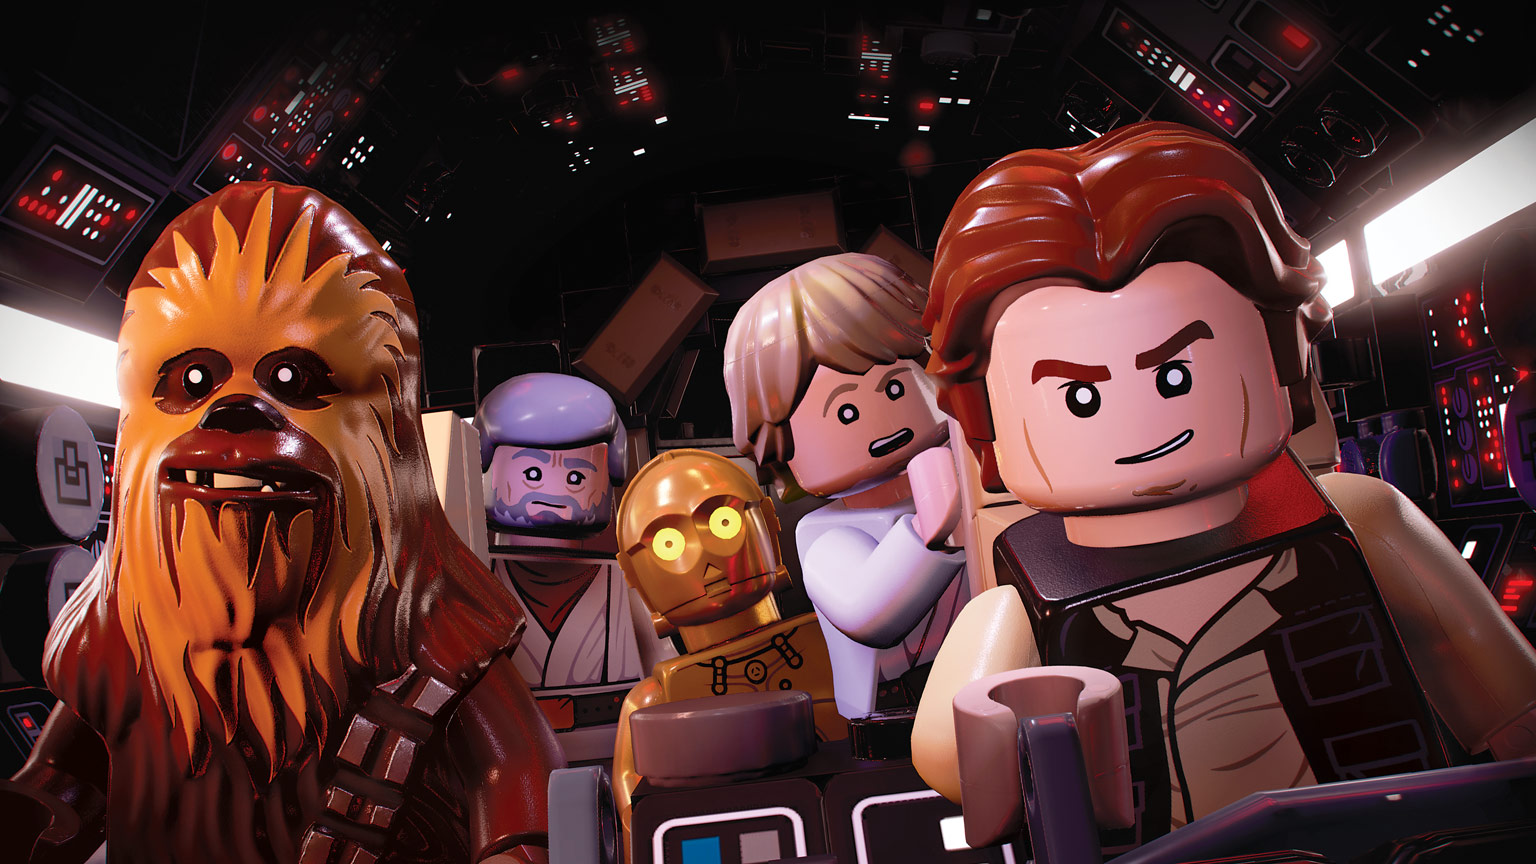 Metacritic GAMES MOVIES TELEVISION PLAY, LEGO Star Wars: The